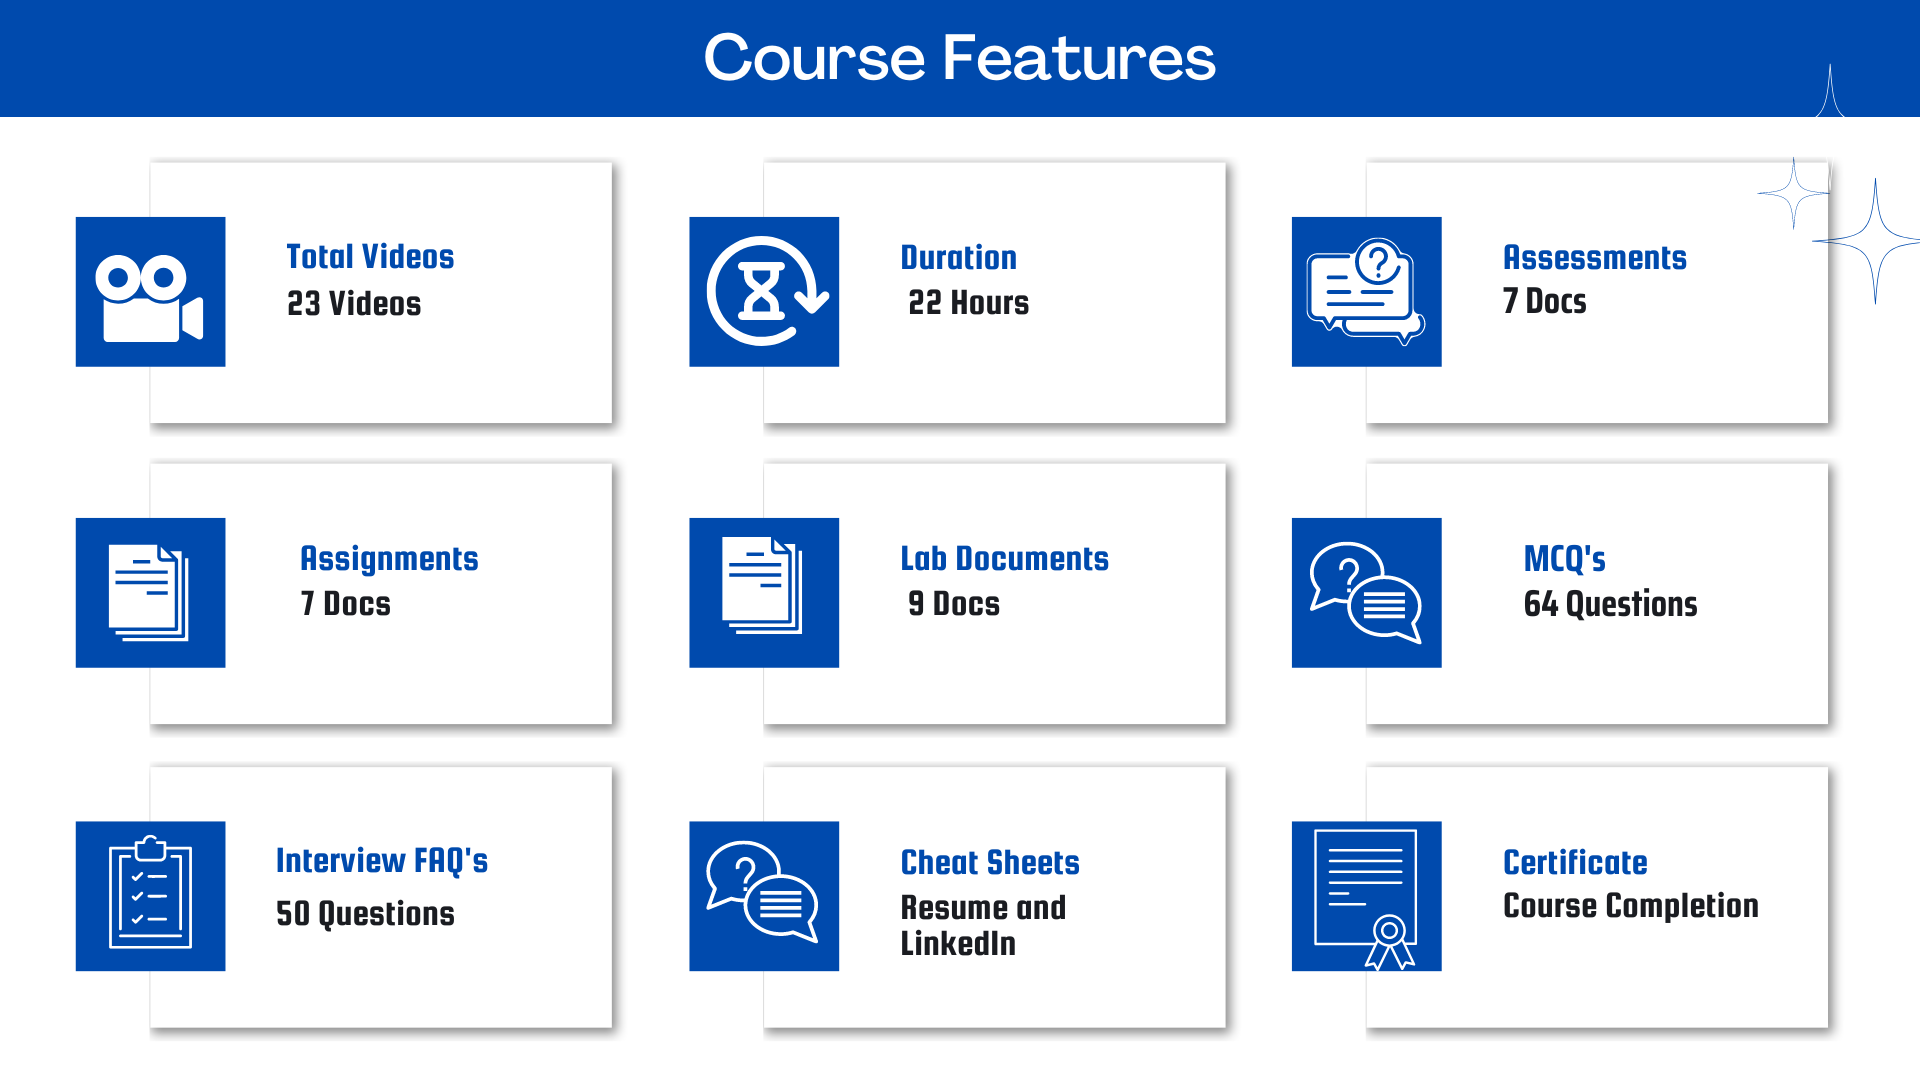 Workday Advanced Studio Course Features